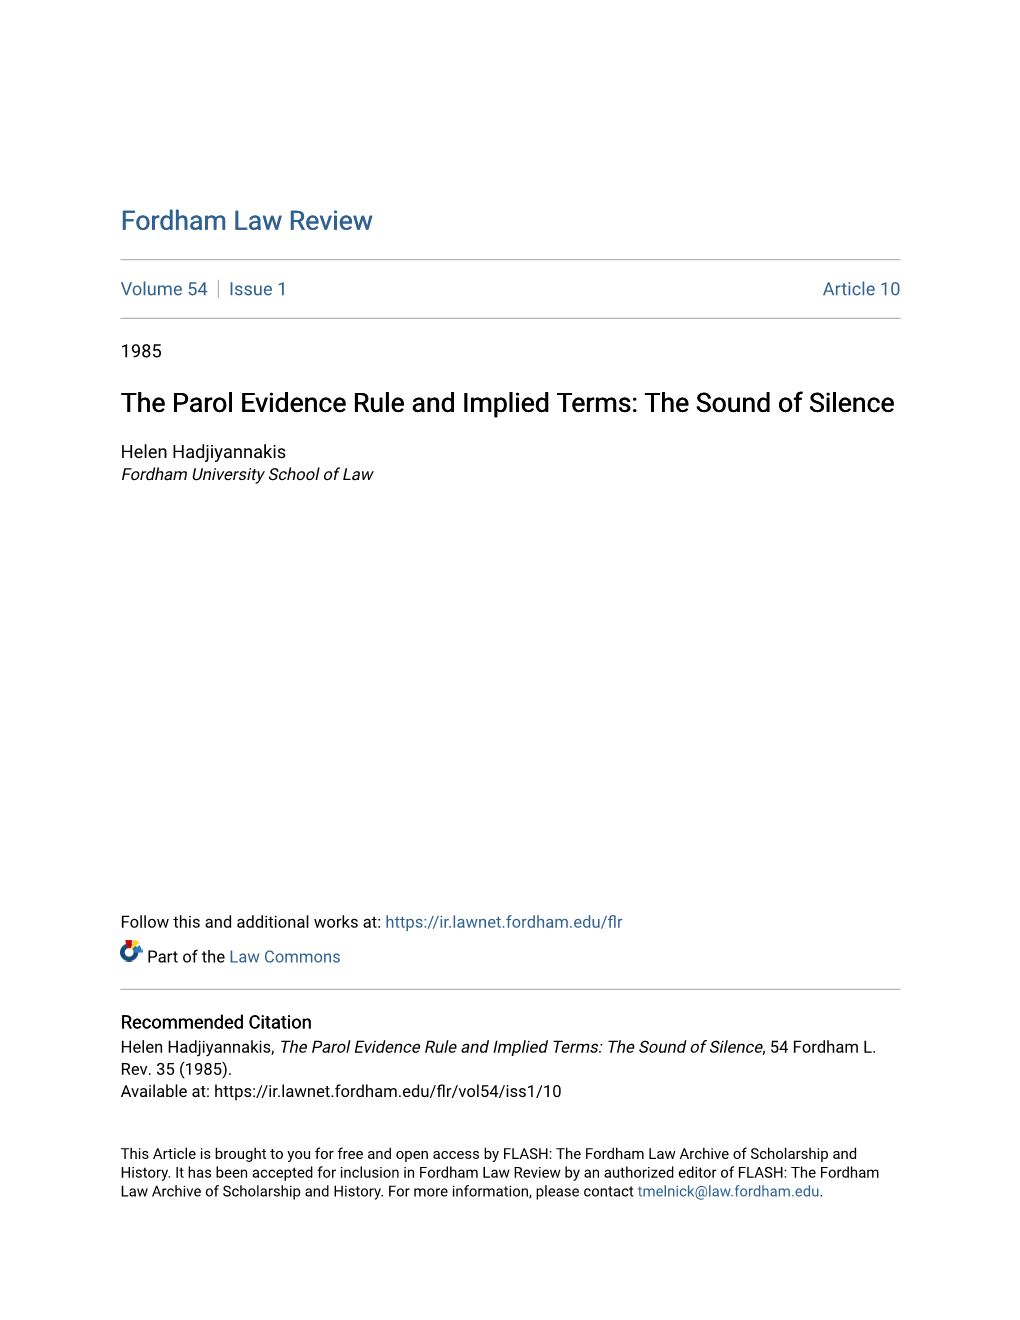 The Parol Evidence Rule and Implied Terms: the Sound of Silence